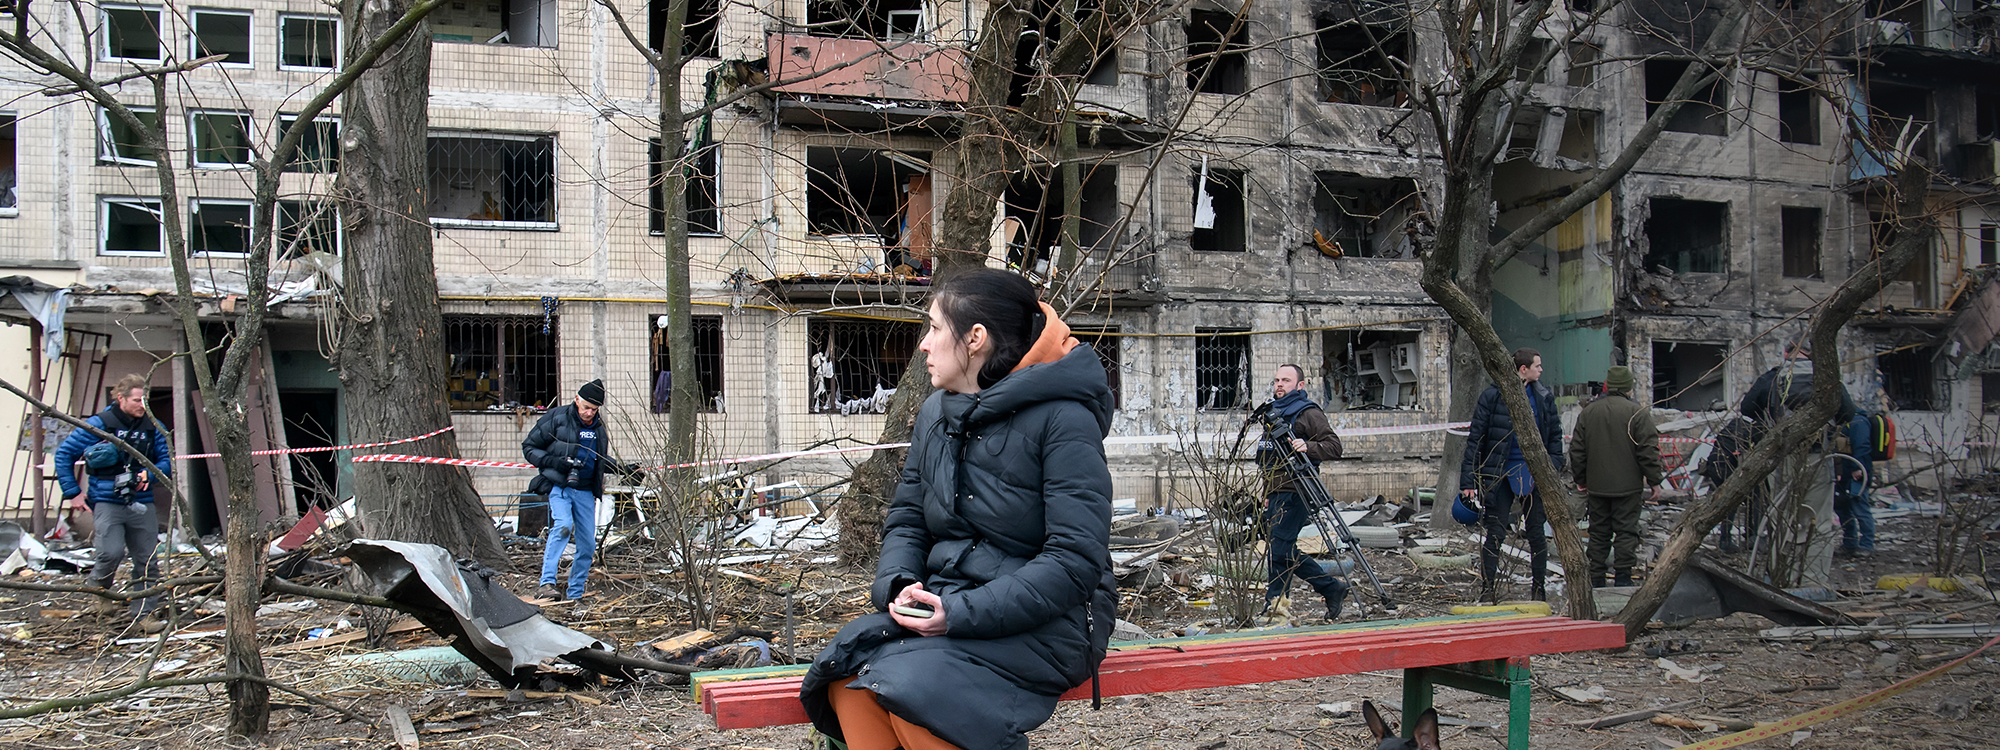 Woman sits on a bench with destroyed buildings behind her